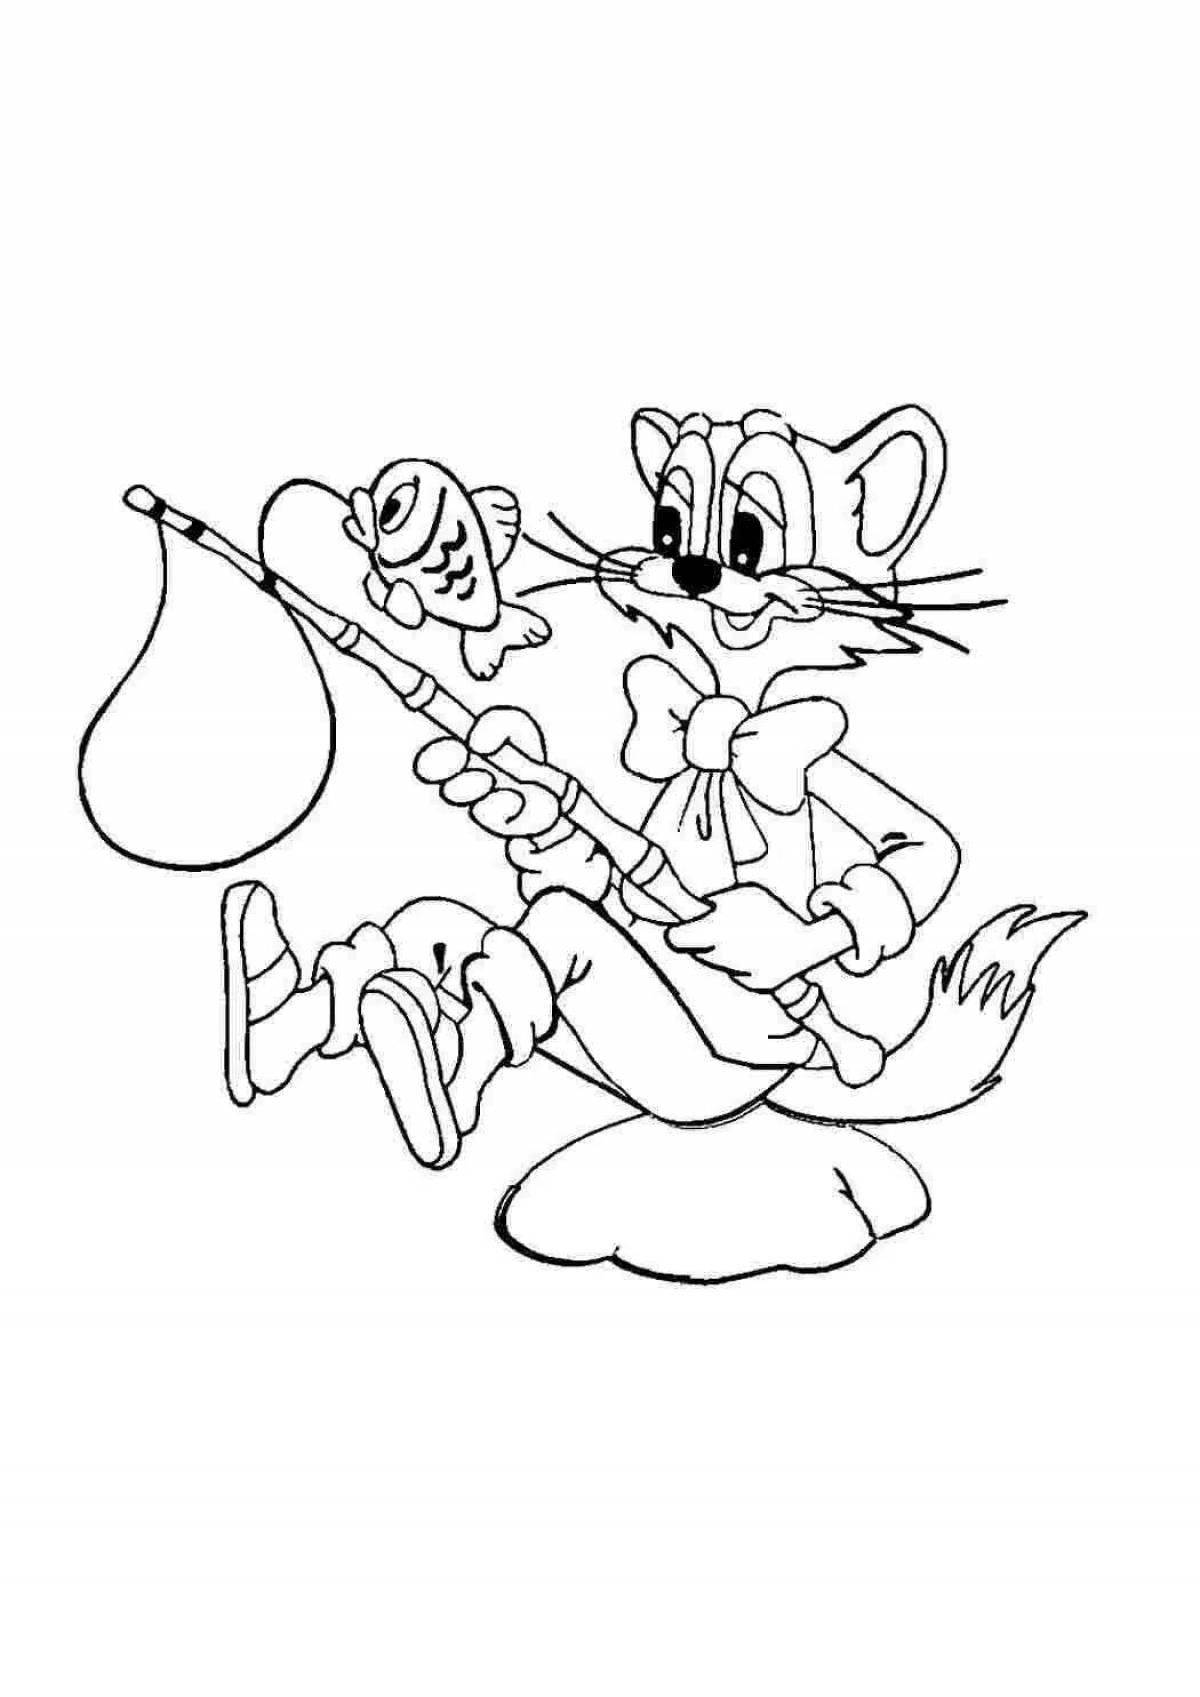 Leopold's vibrant coloring page